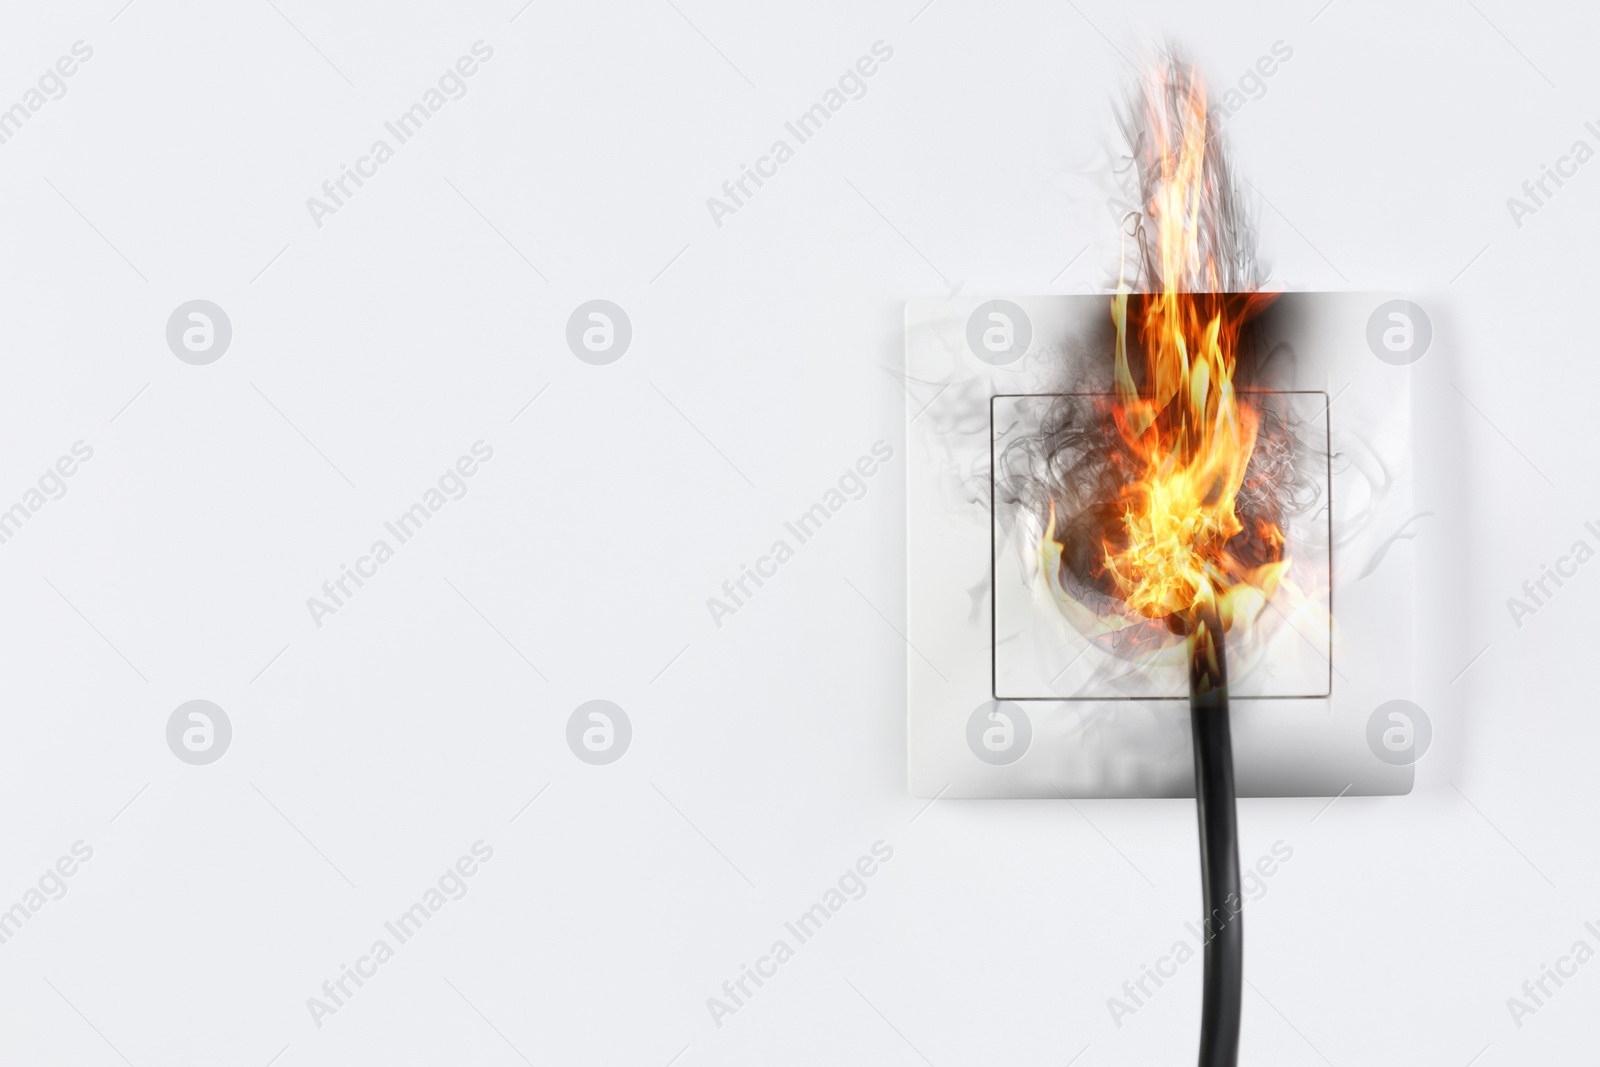 Image of  Electrical short circuit leading to plug ignition. Space for text